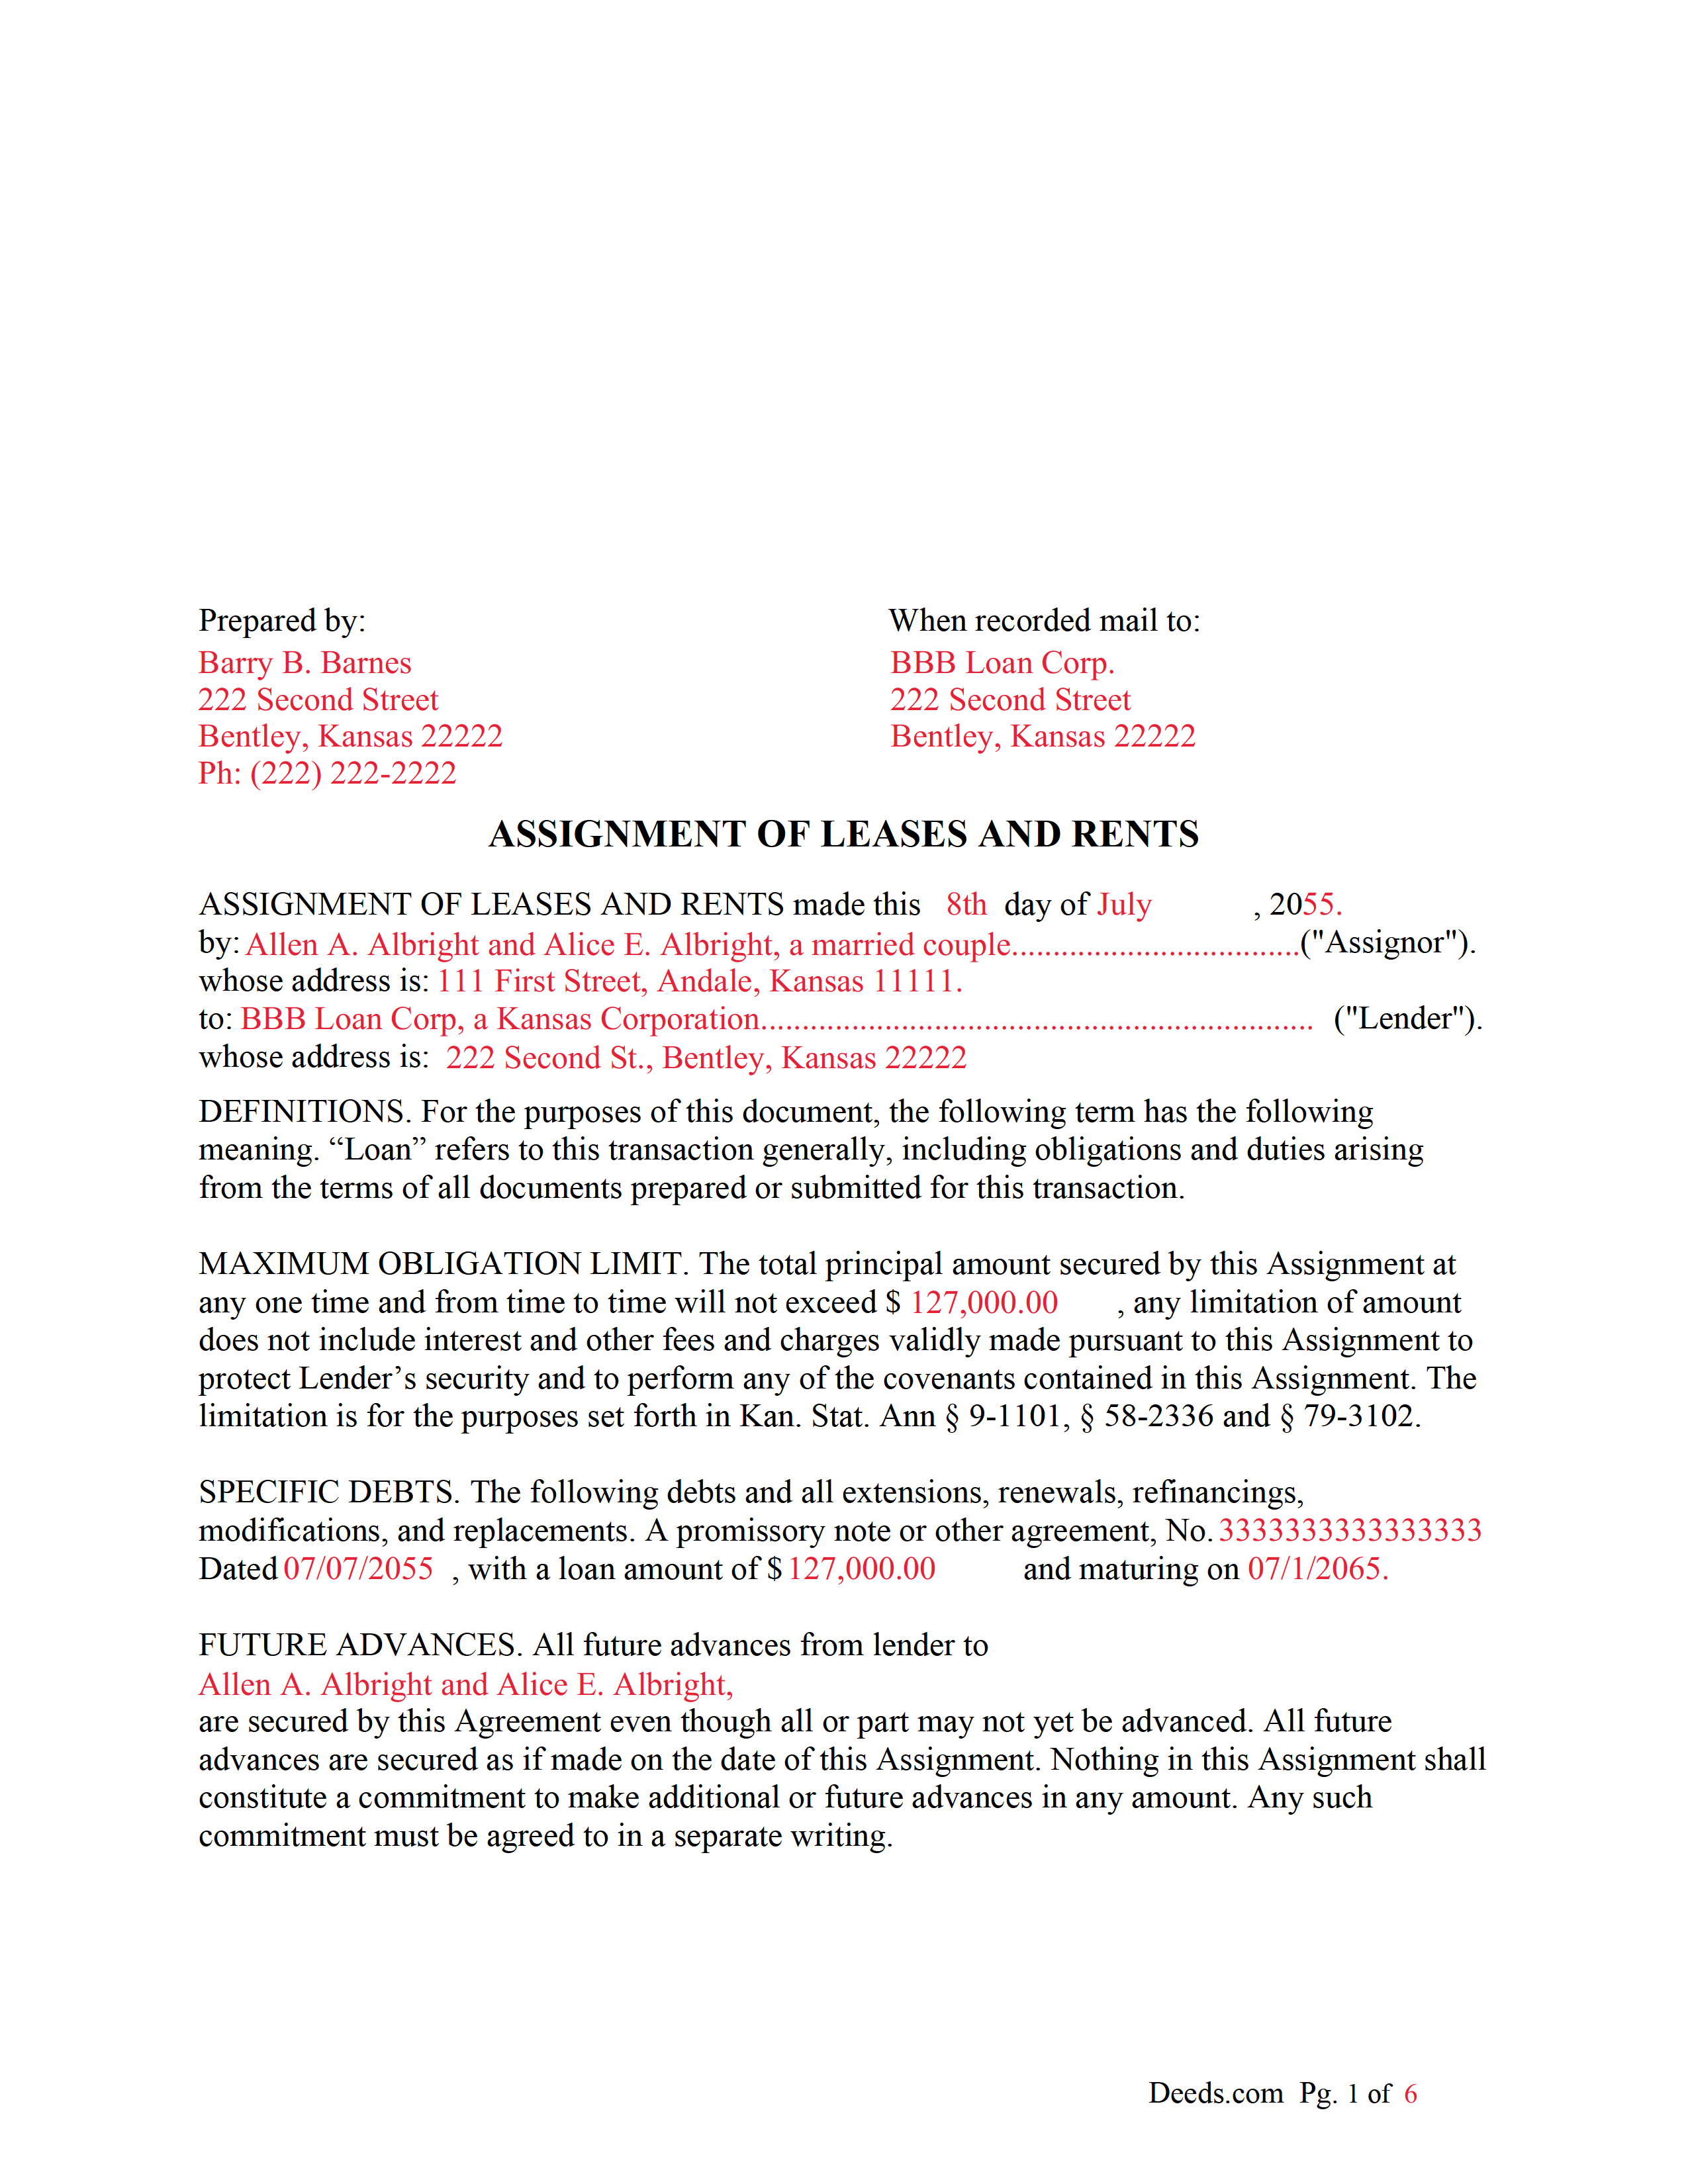 Completed Example of the Assignment of Leases and Rents Document